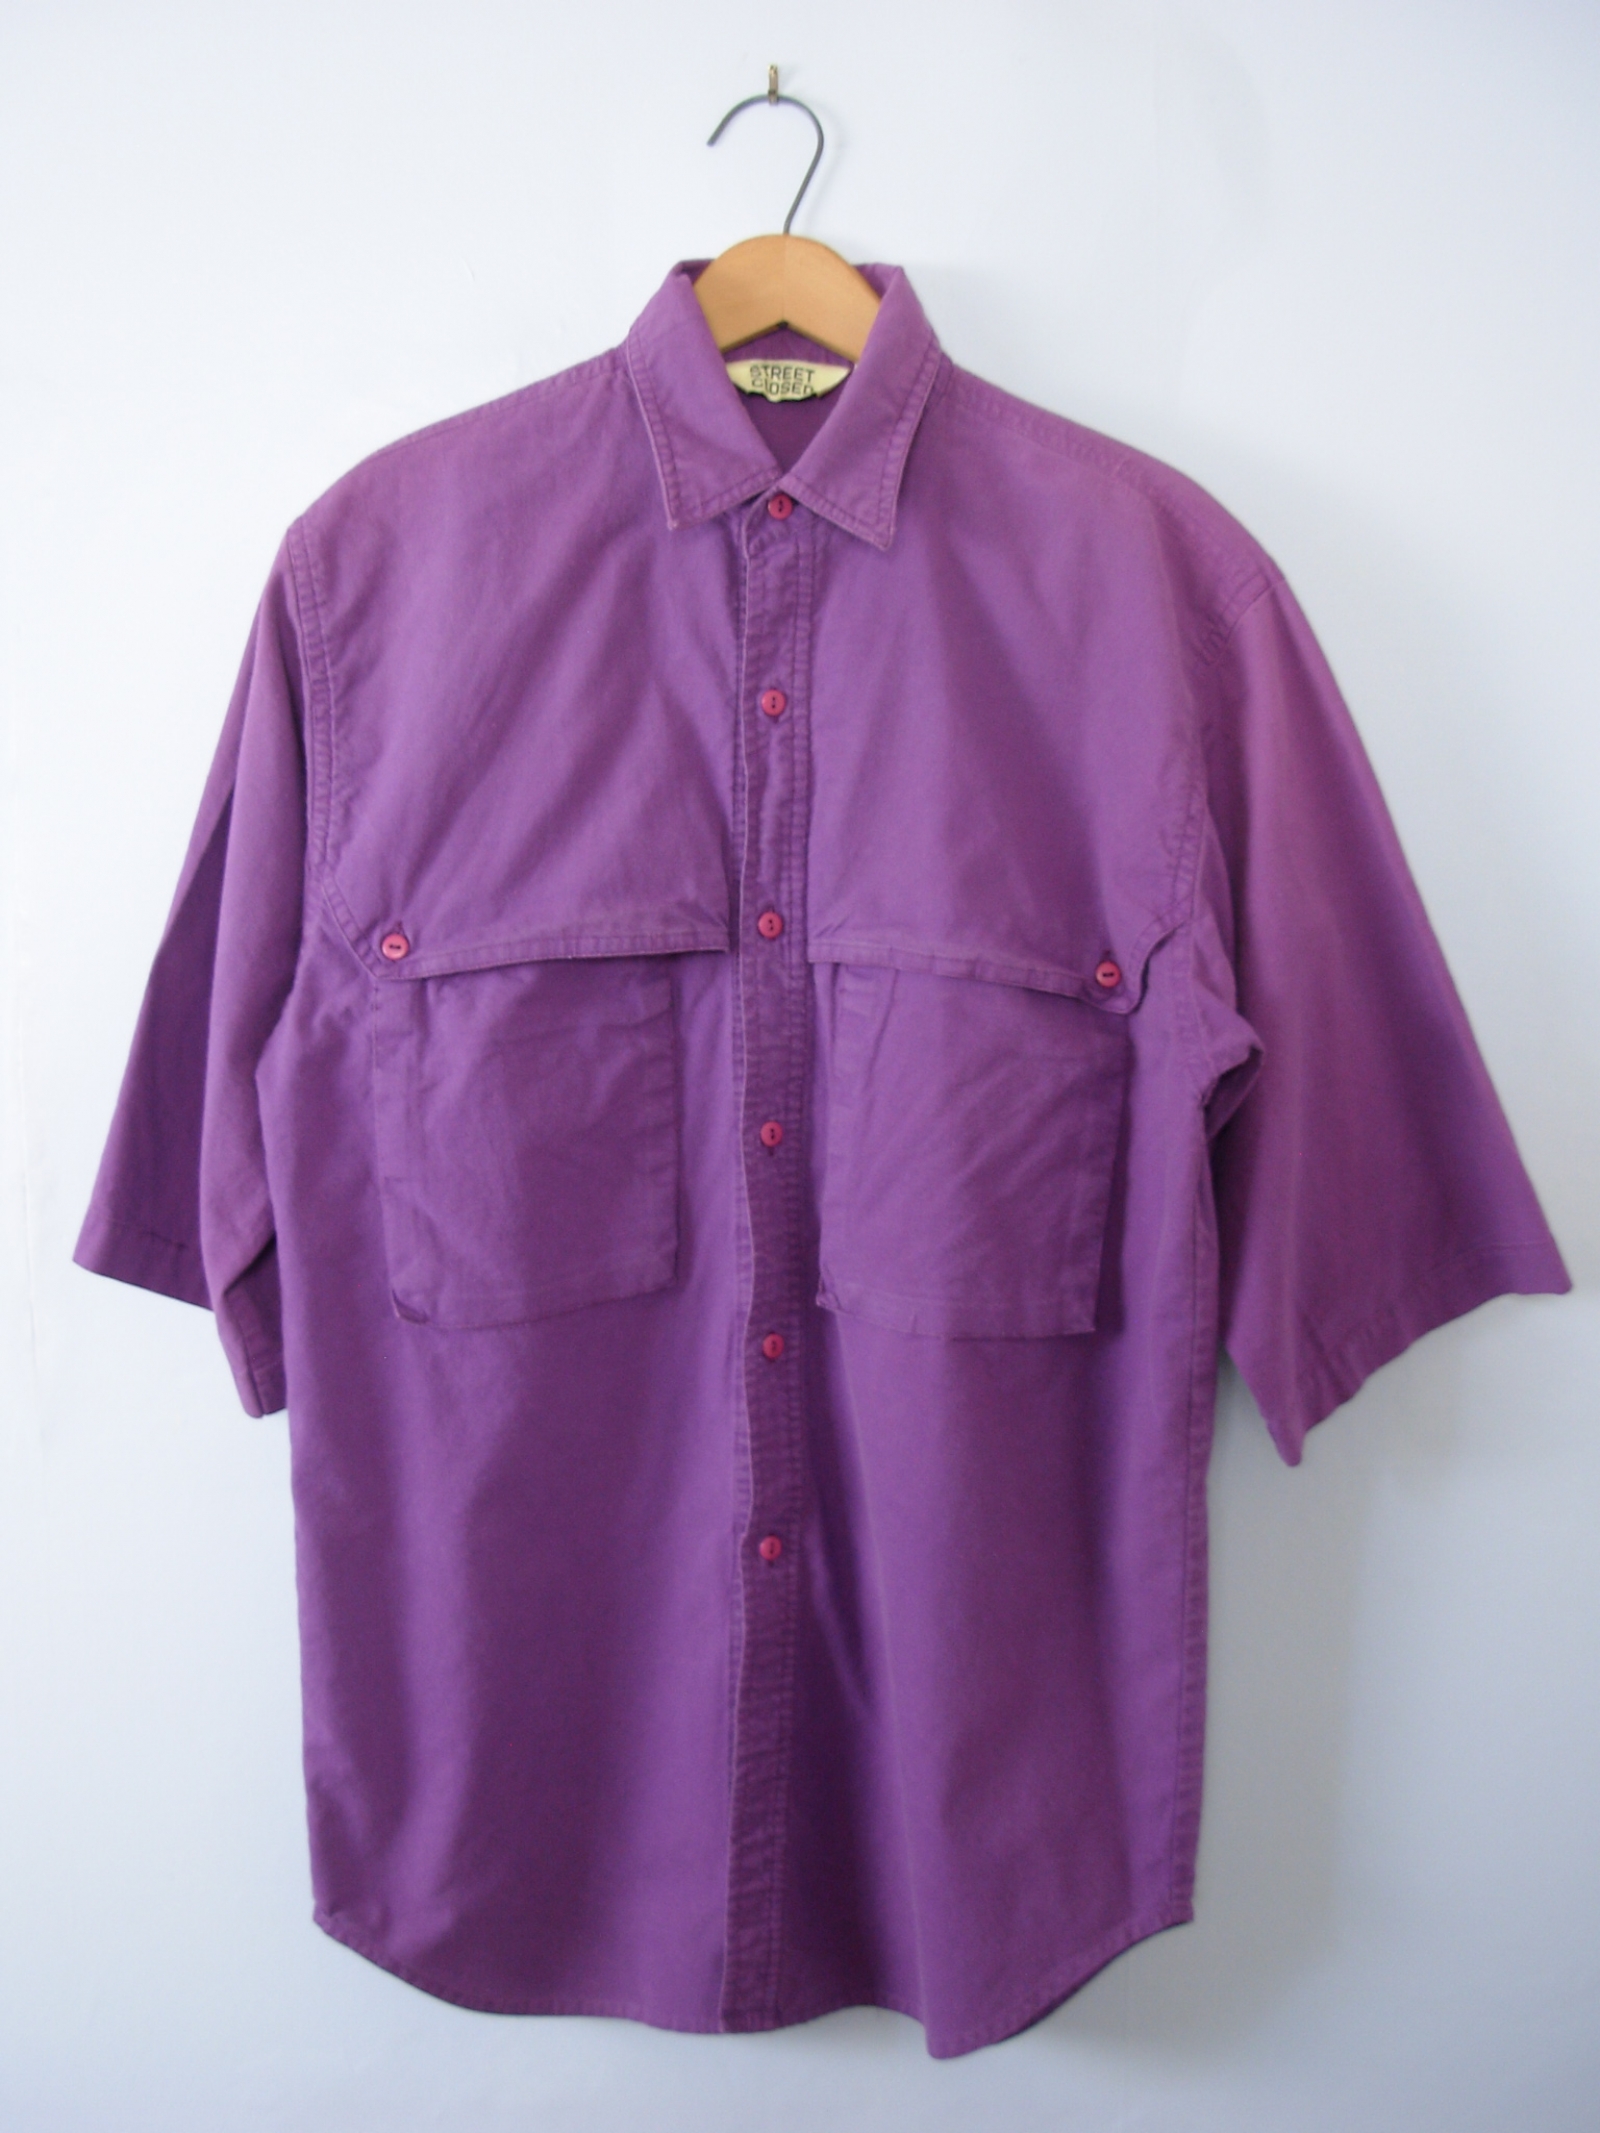 Vintage 90's short sleeved purple button up shirt, men's size small ...